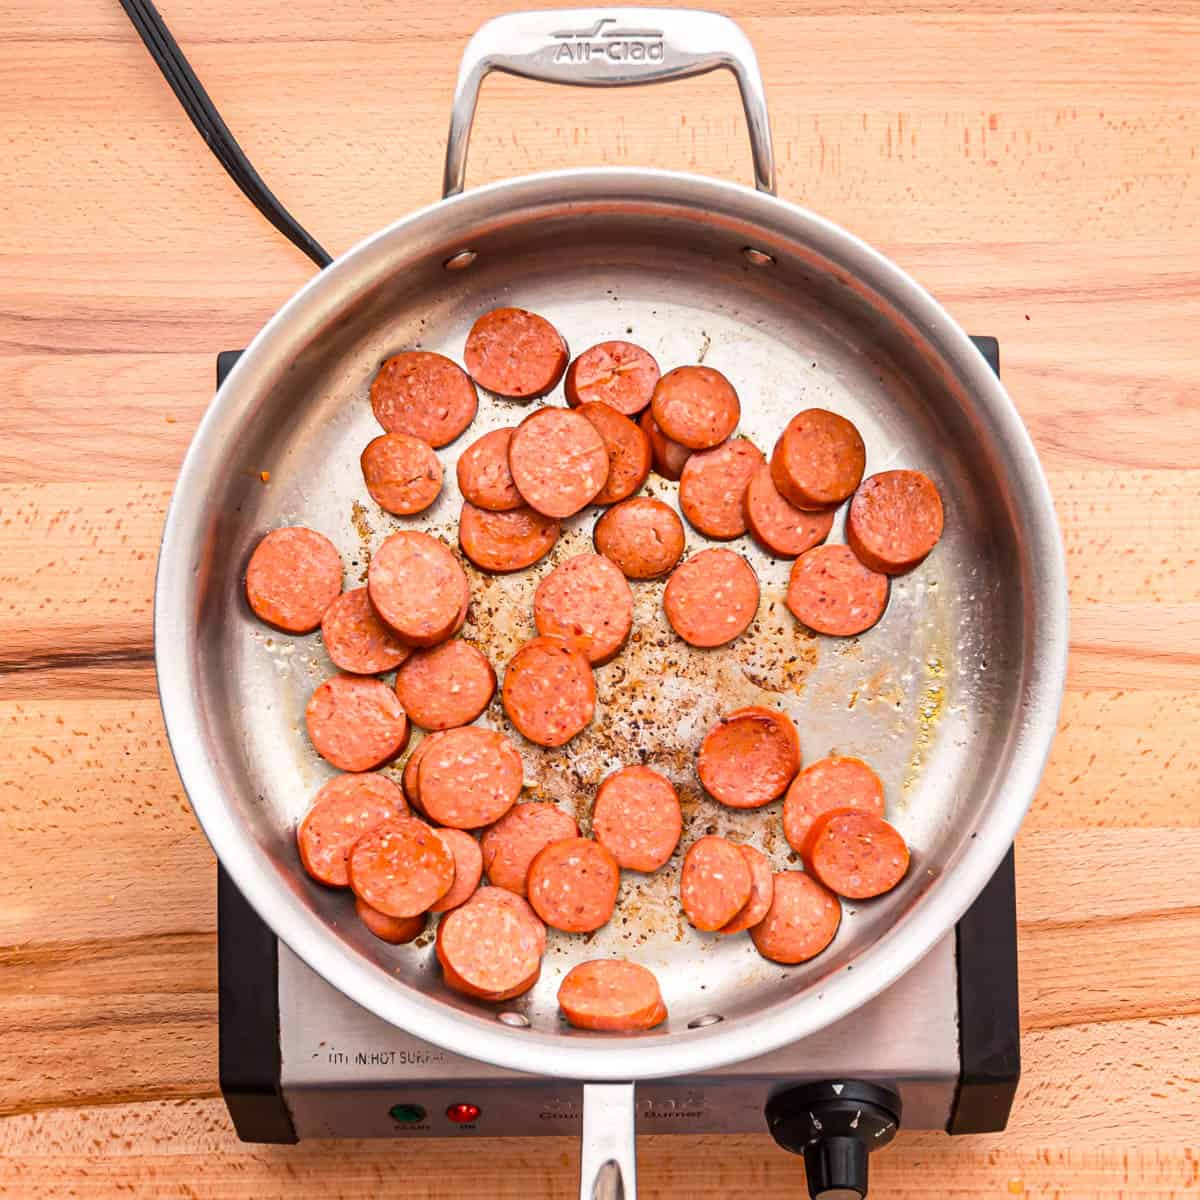 After removing the shrimp from the skillet, continue by browning the sausage for about 1-2 minutes.